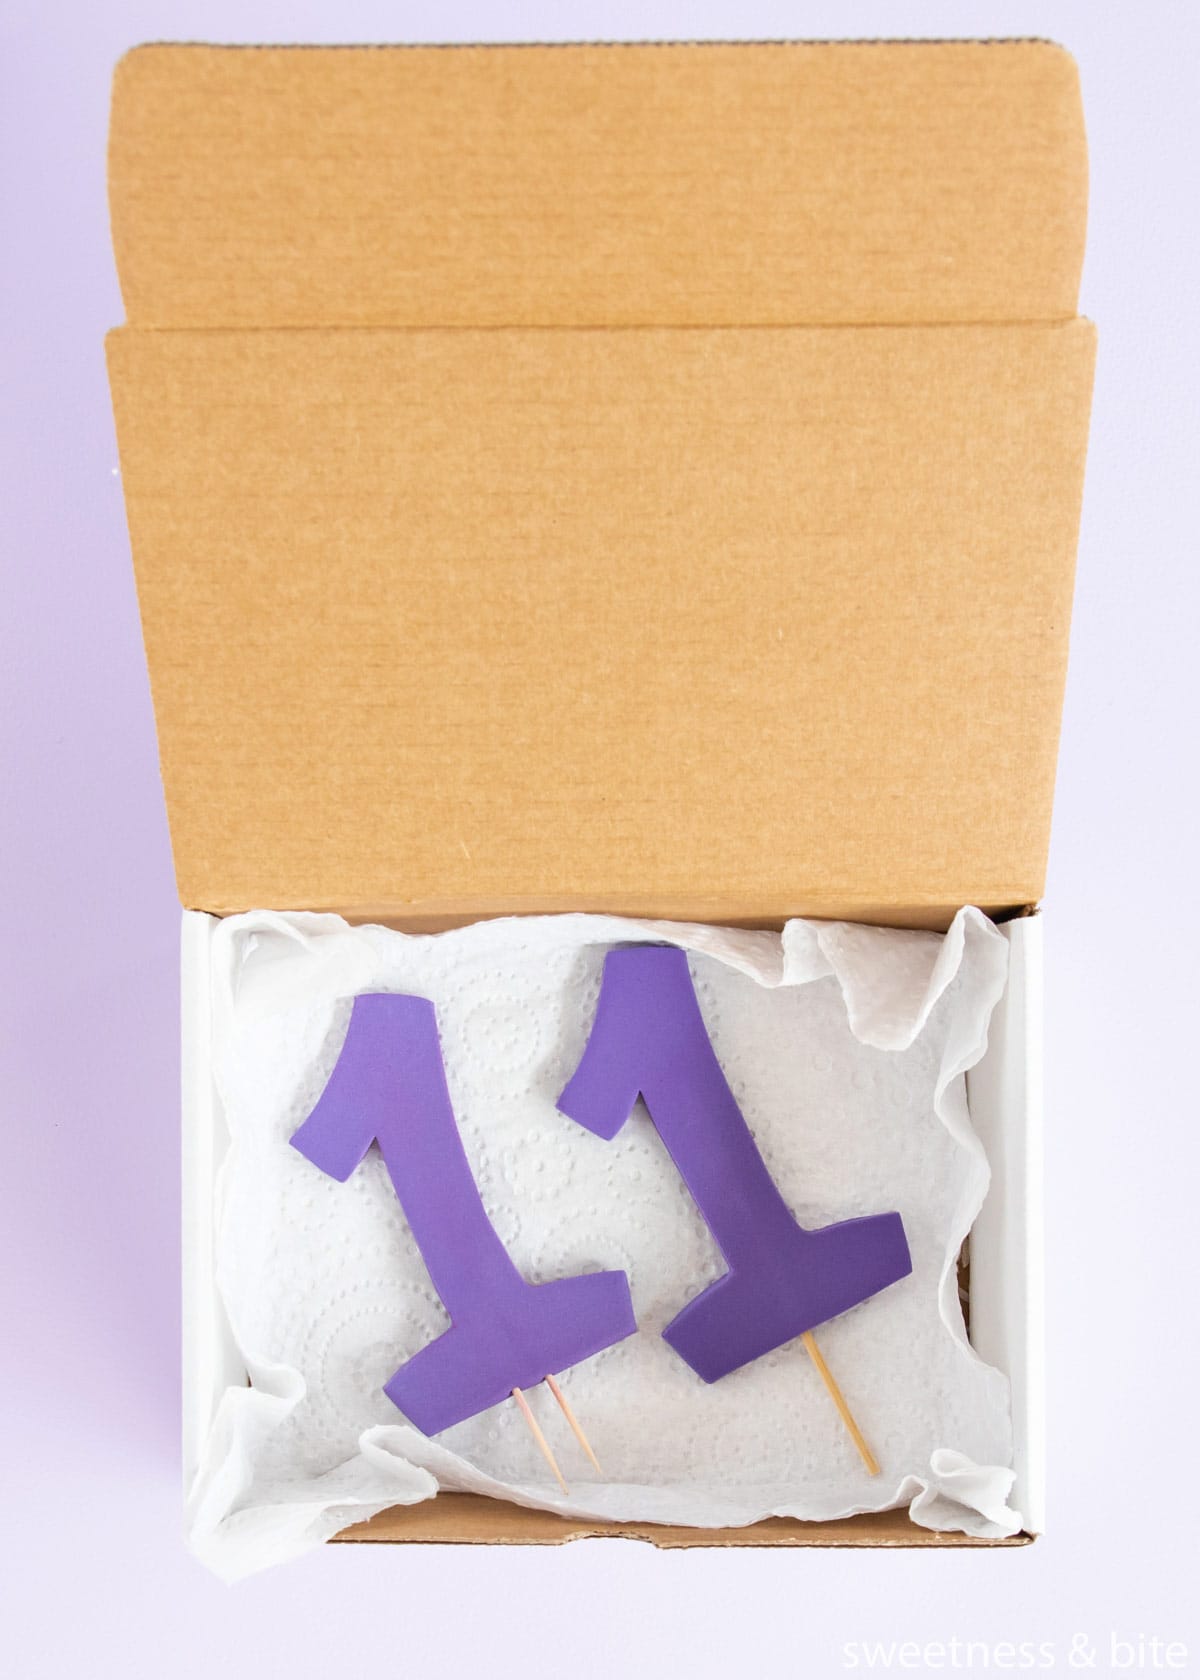 Two purple gumpaste number 1 cake toppers, being stored in a box.